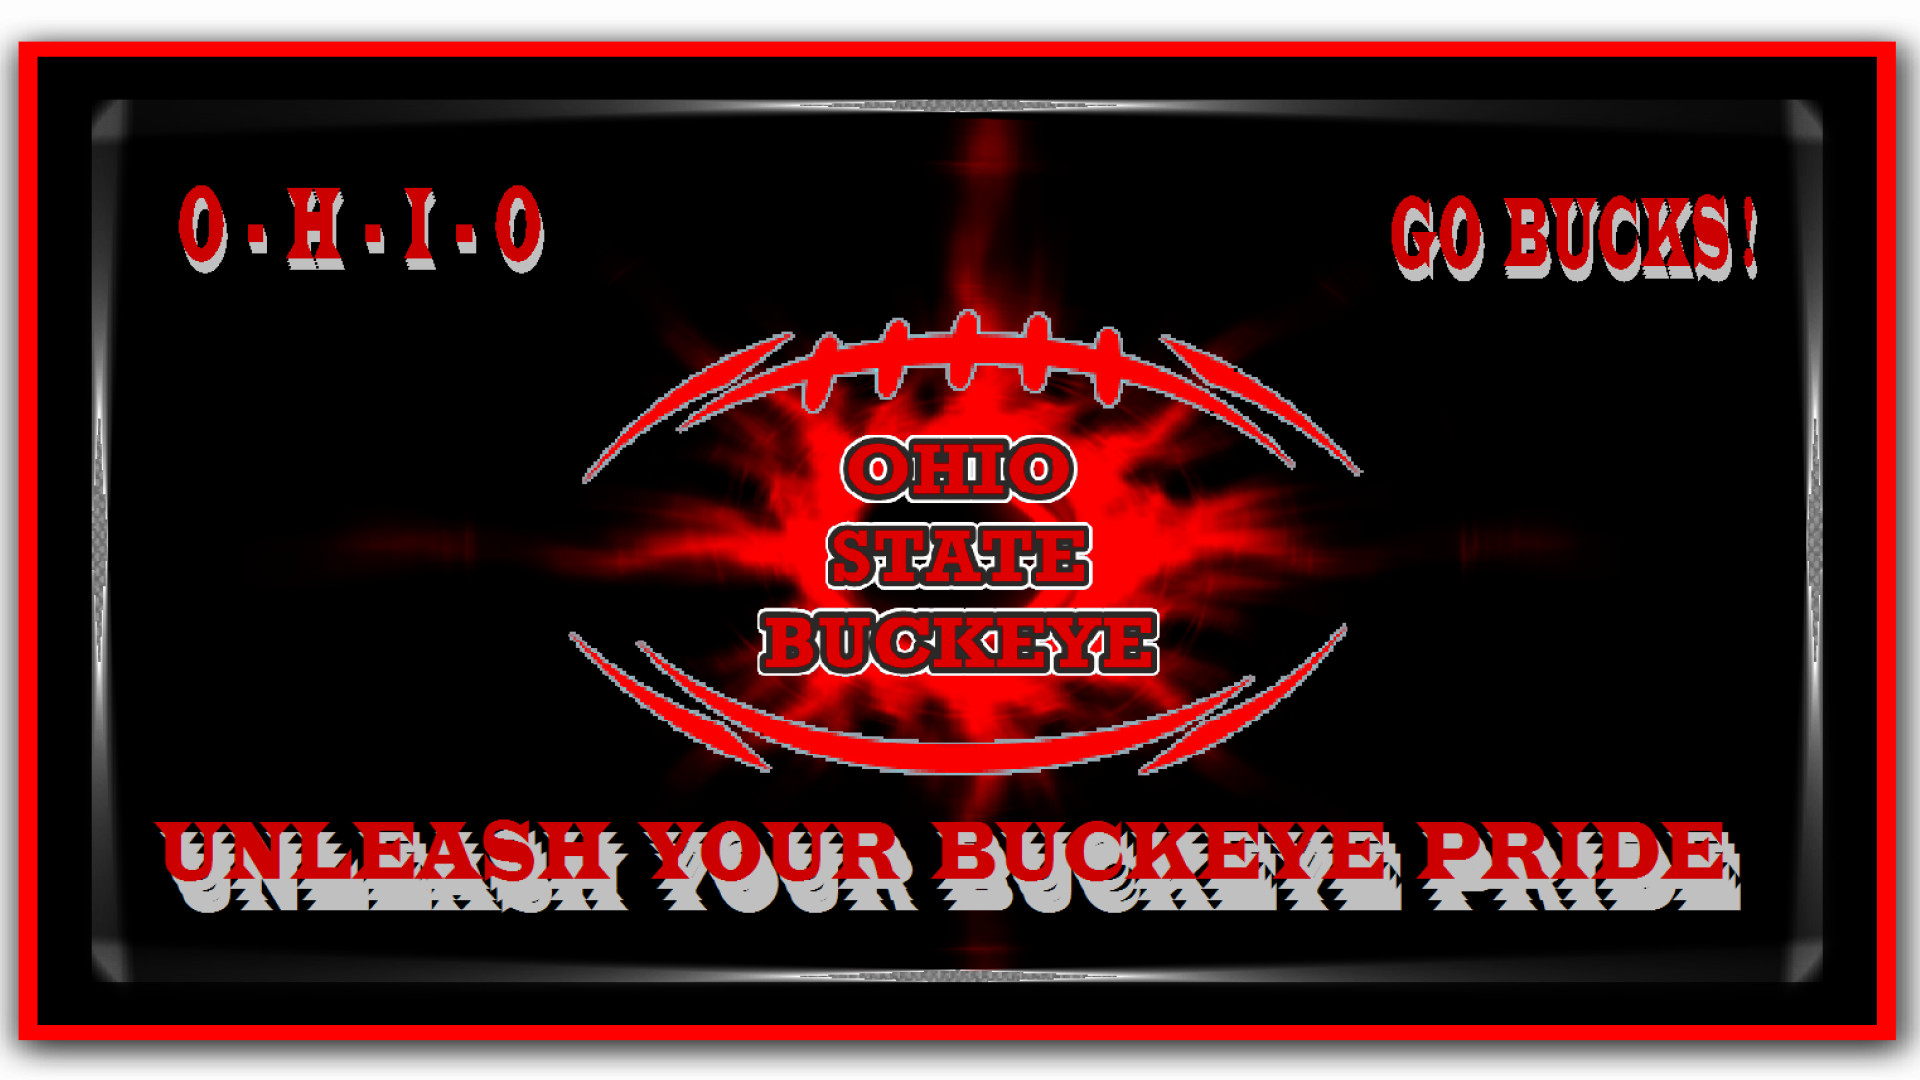 Ohio State Live Wallpaper HD Android Apps on Google Play